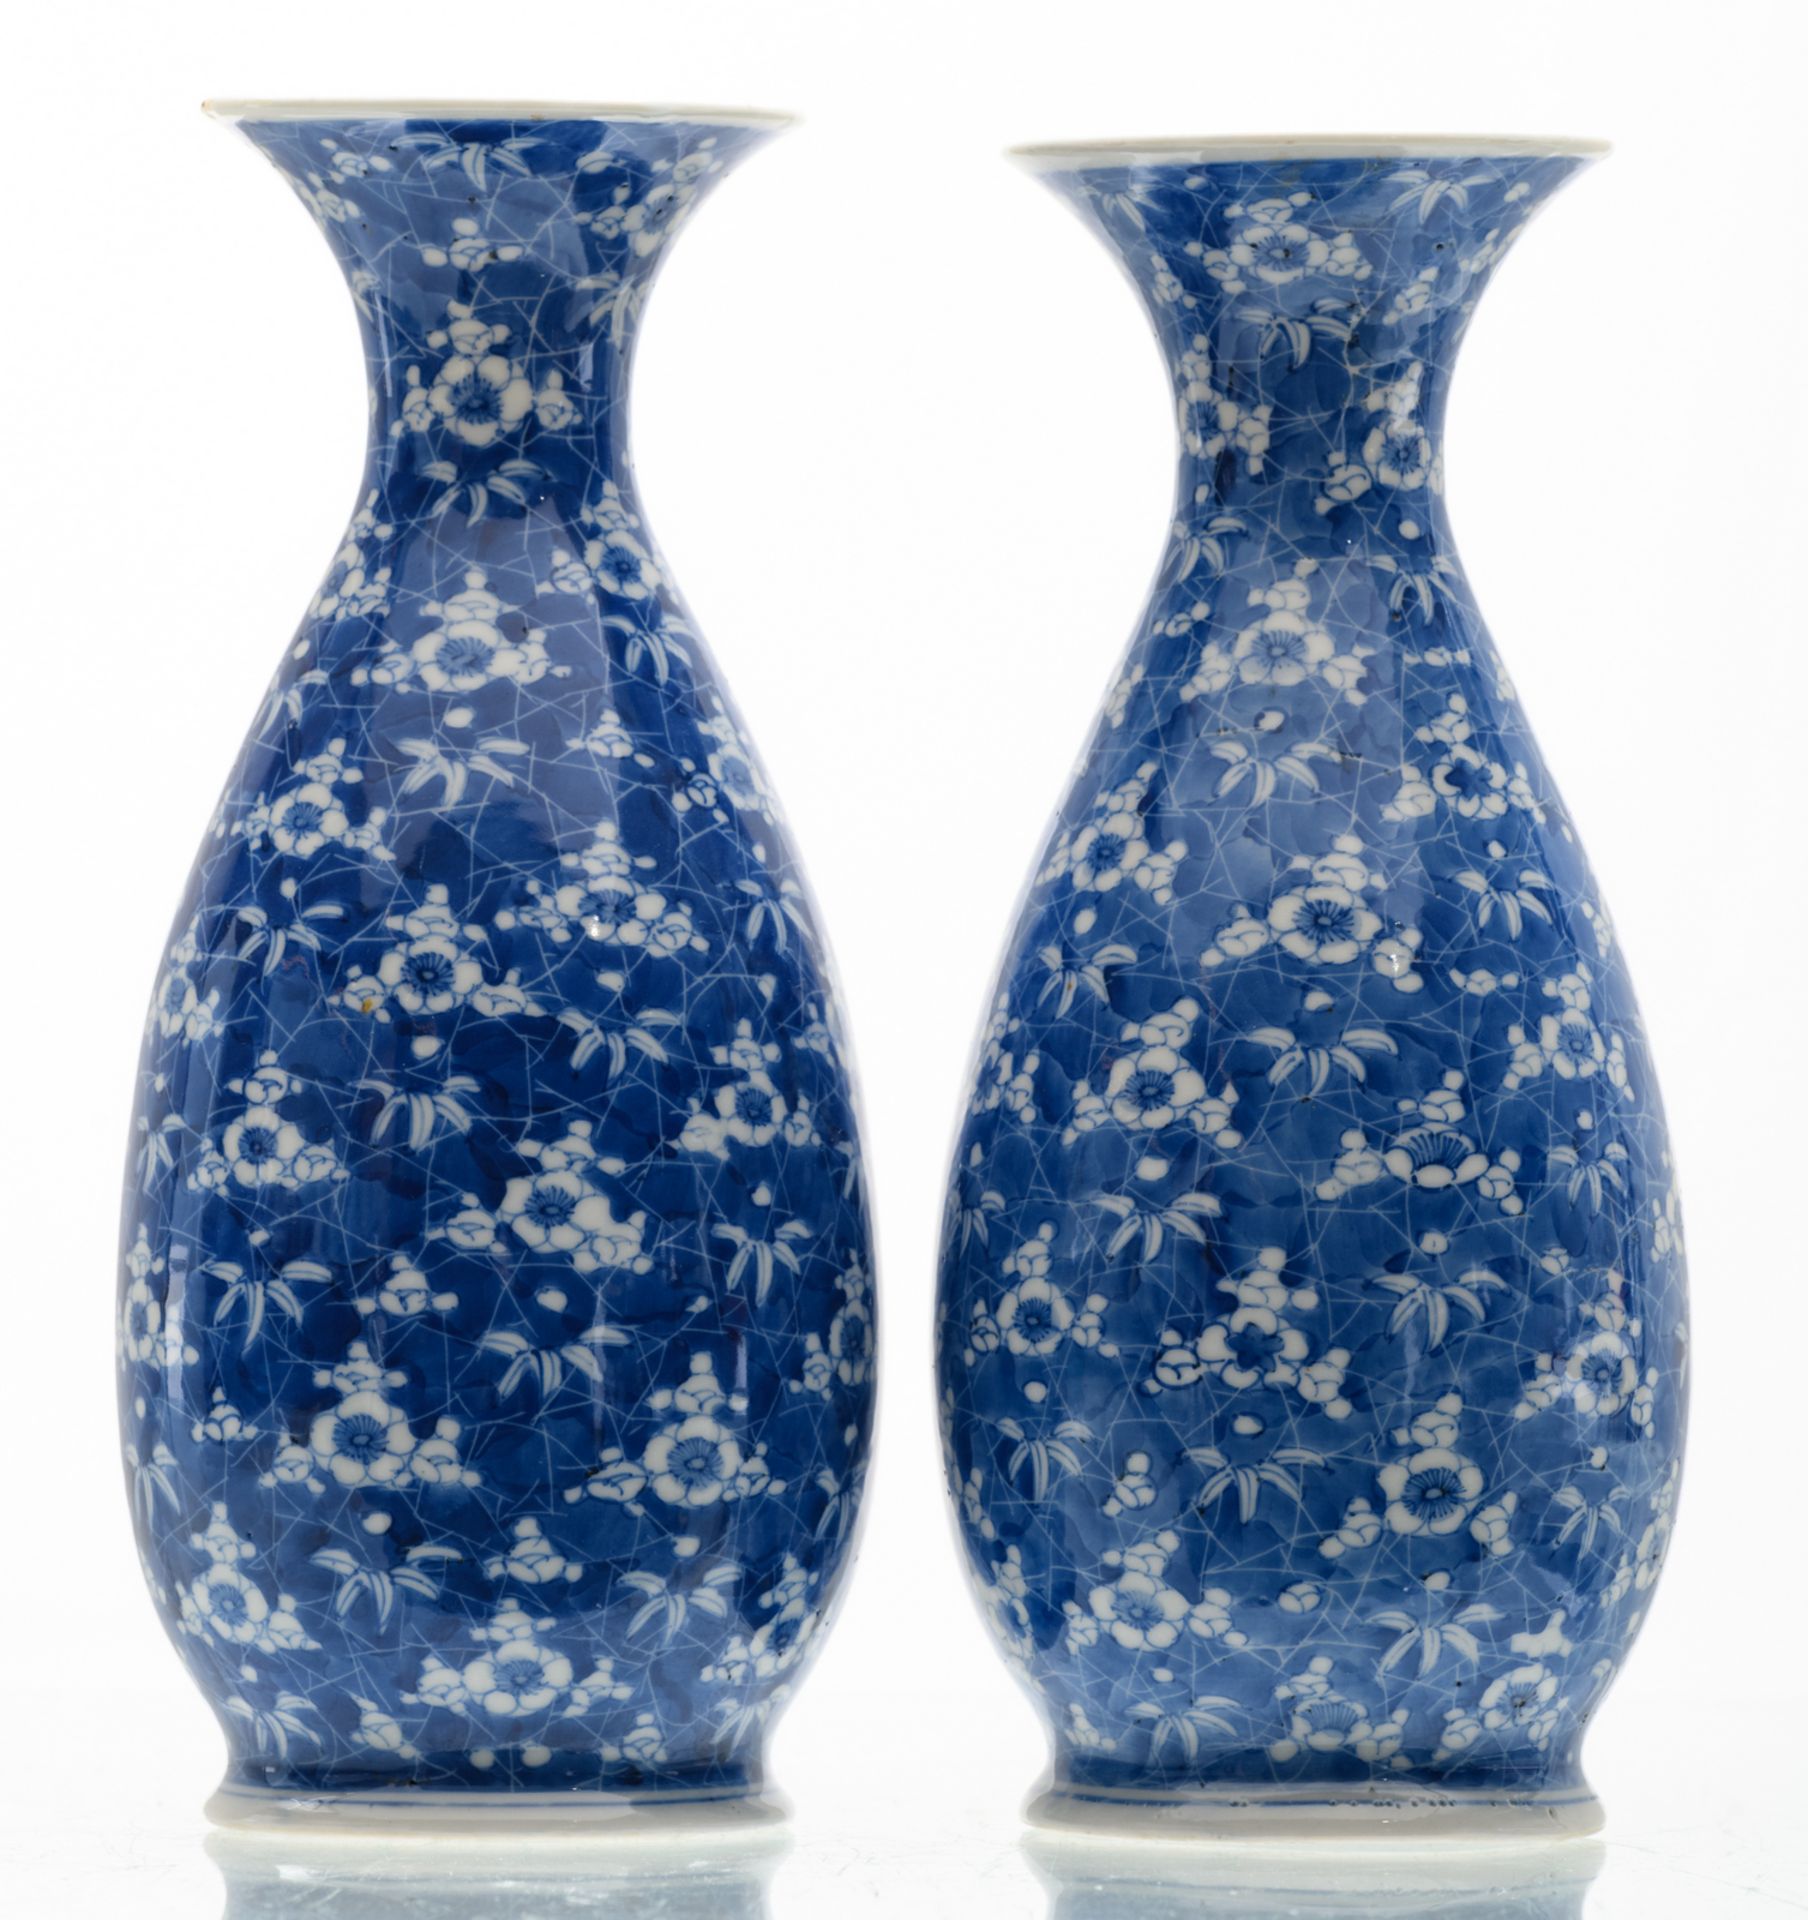 Two Japanese blue and white floral decorated vases, marked, Meiji and period, H 26 cm - Image 2 of 6